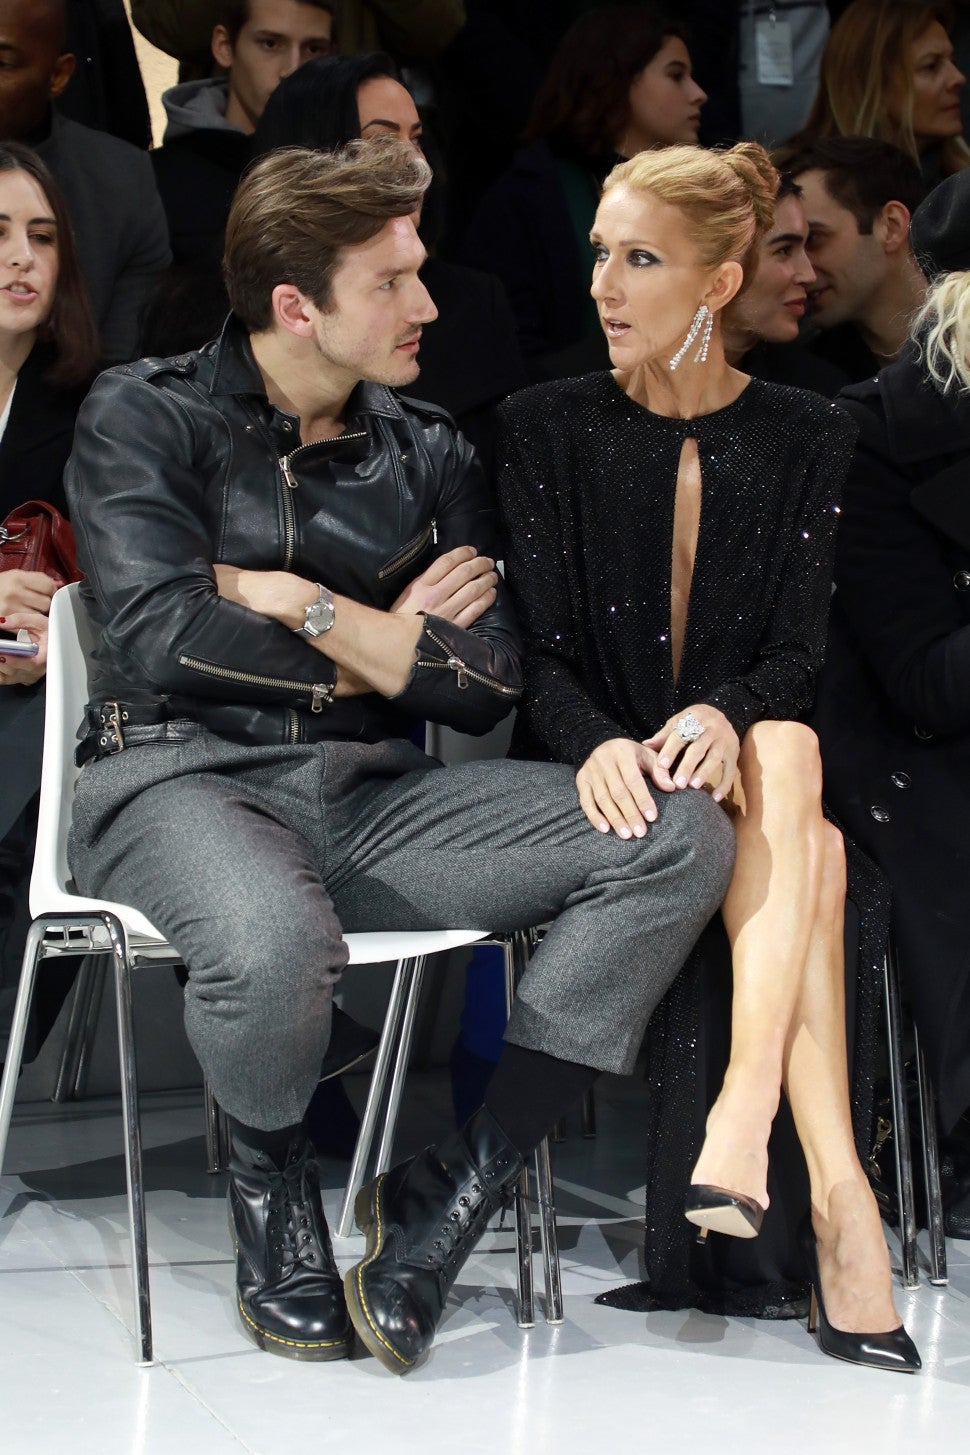 Celine Dion and Pepe Munoz at Alexandre Vauthier couture show